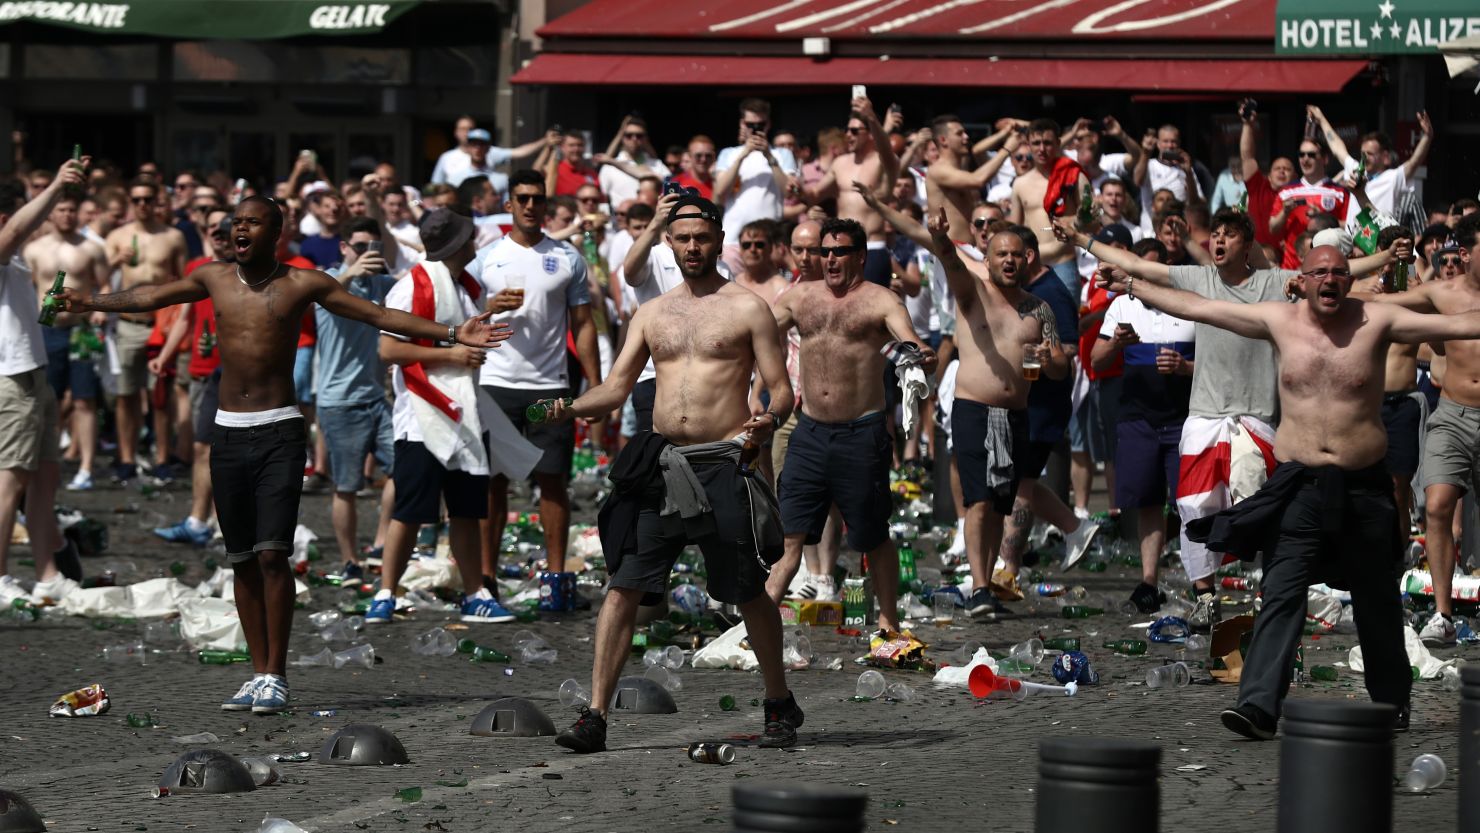 Raucous English fans throw bottles Saturday before the Euro 2016 match against Russia in Marseilles, France.